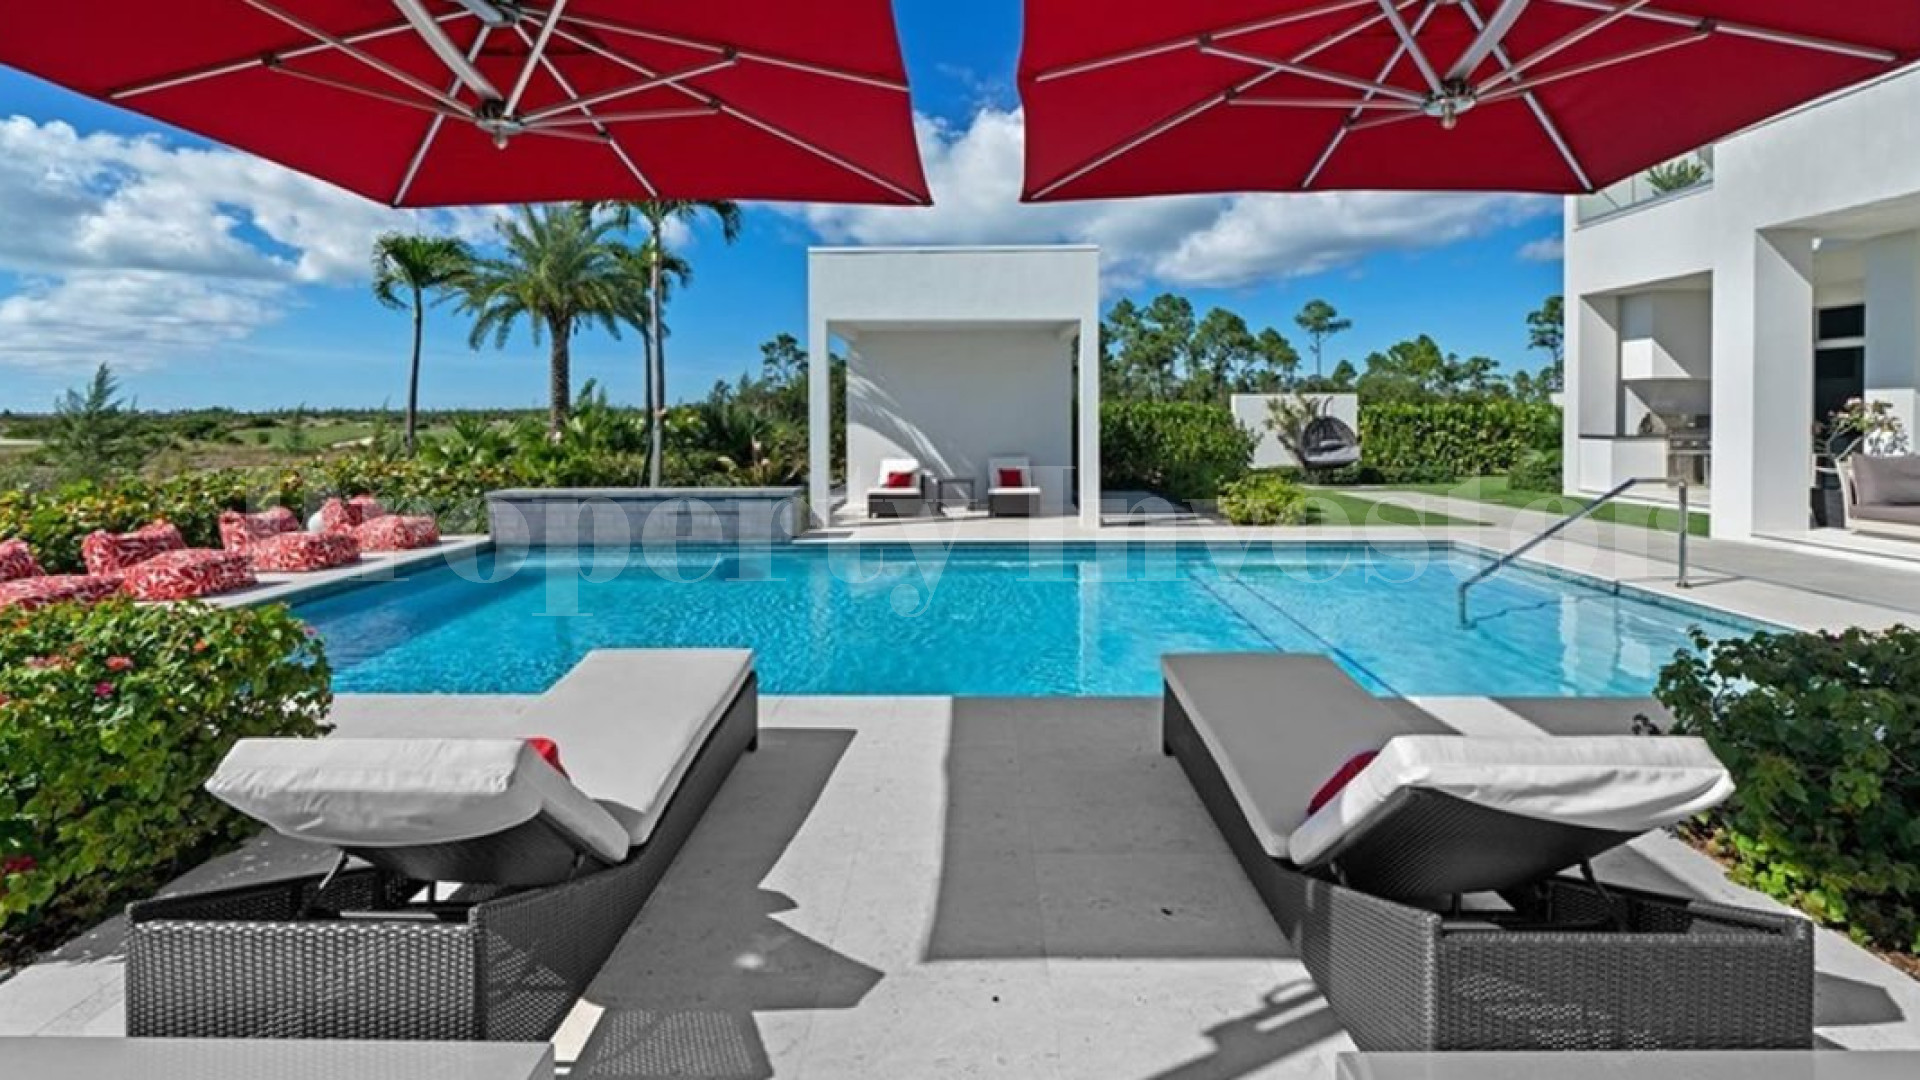 Magnificent 5 Bedroom Luxury Designer Community Golf Villa for Sale in New Providence, Bahamas